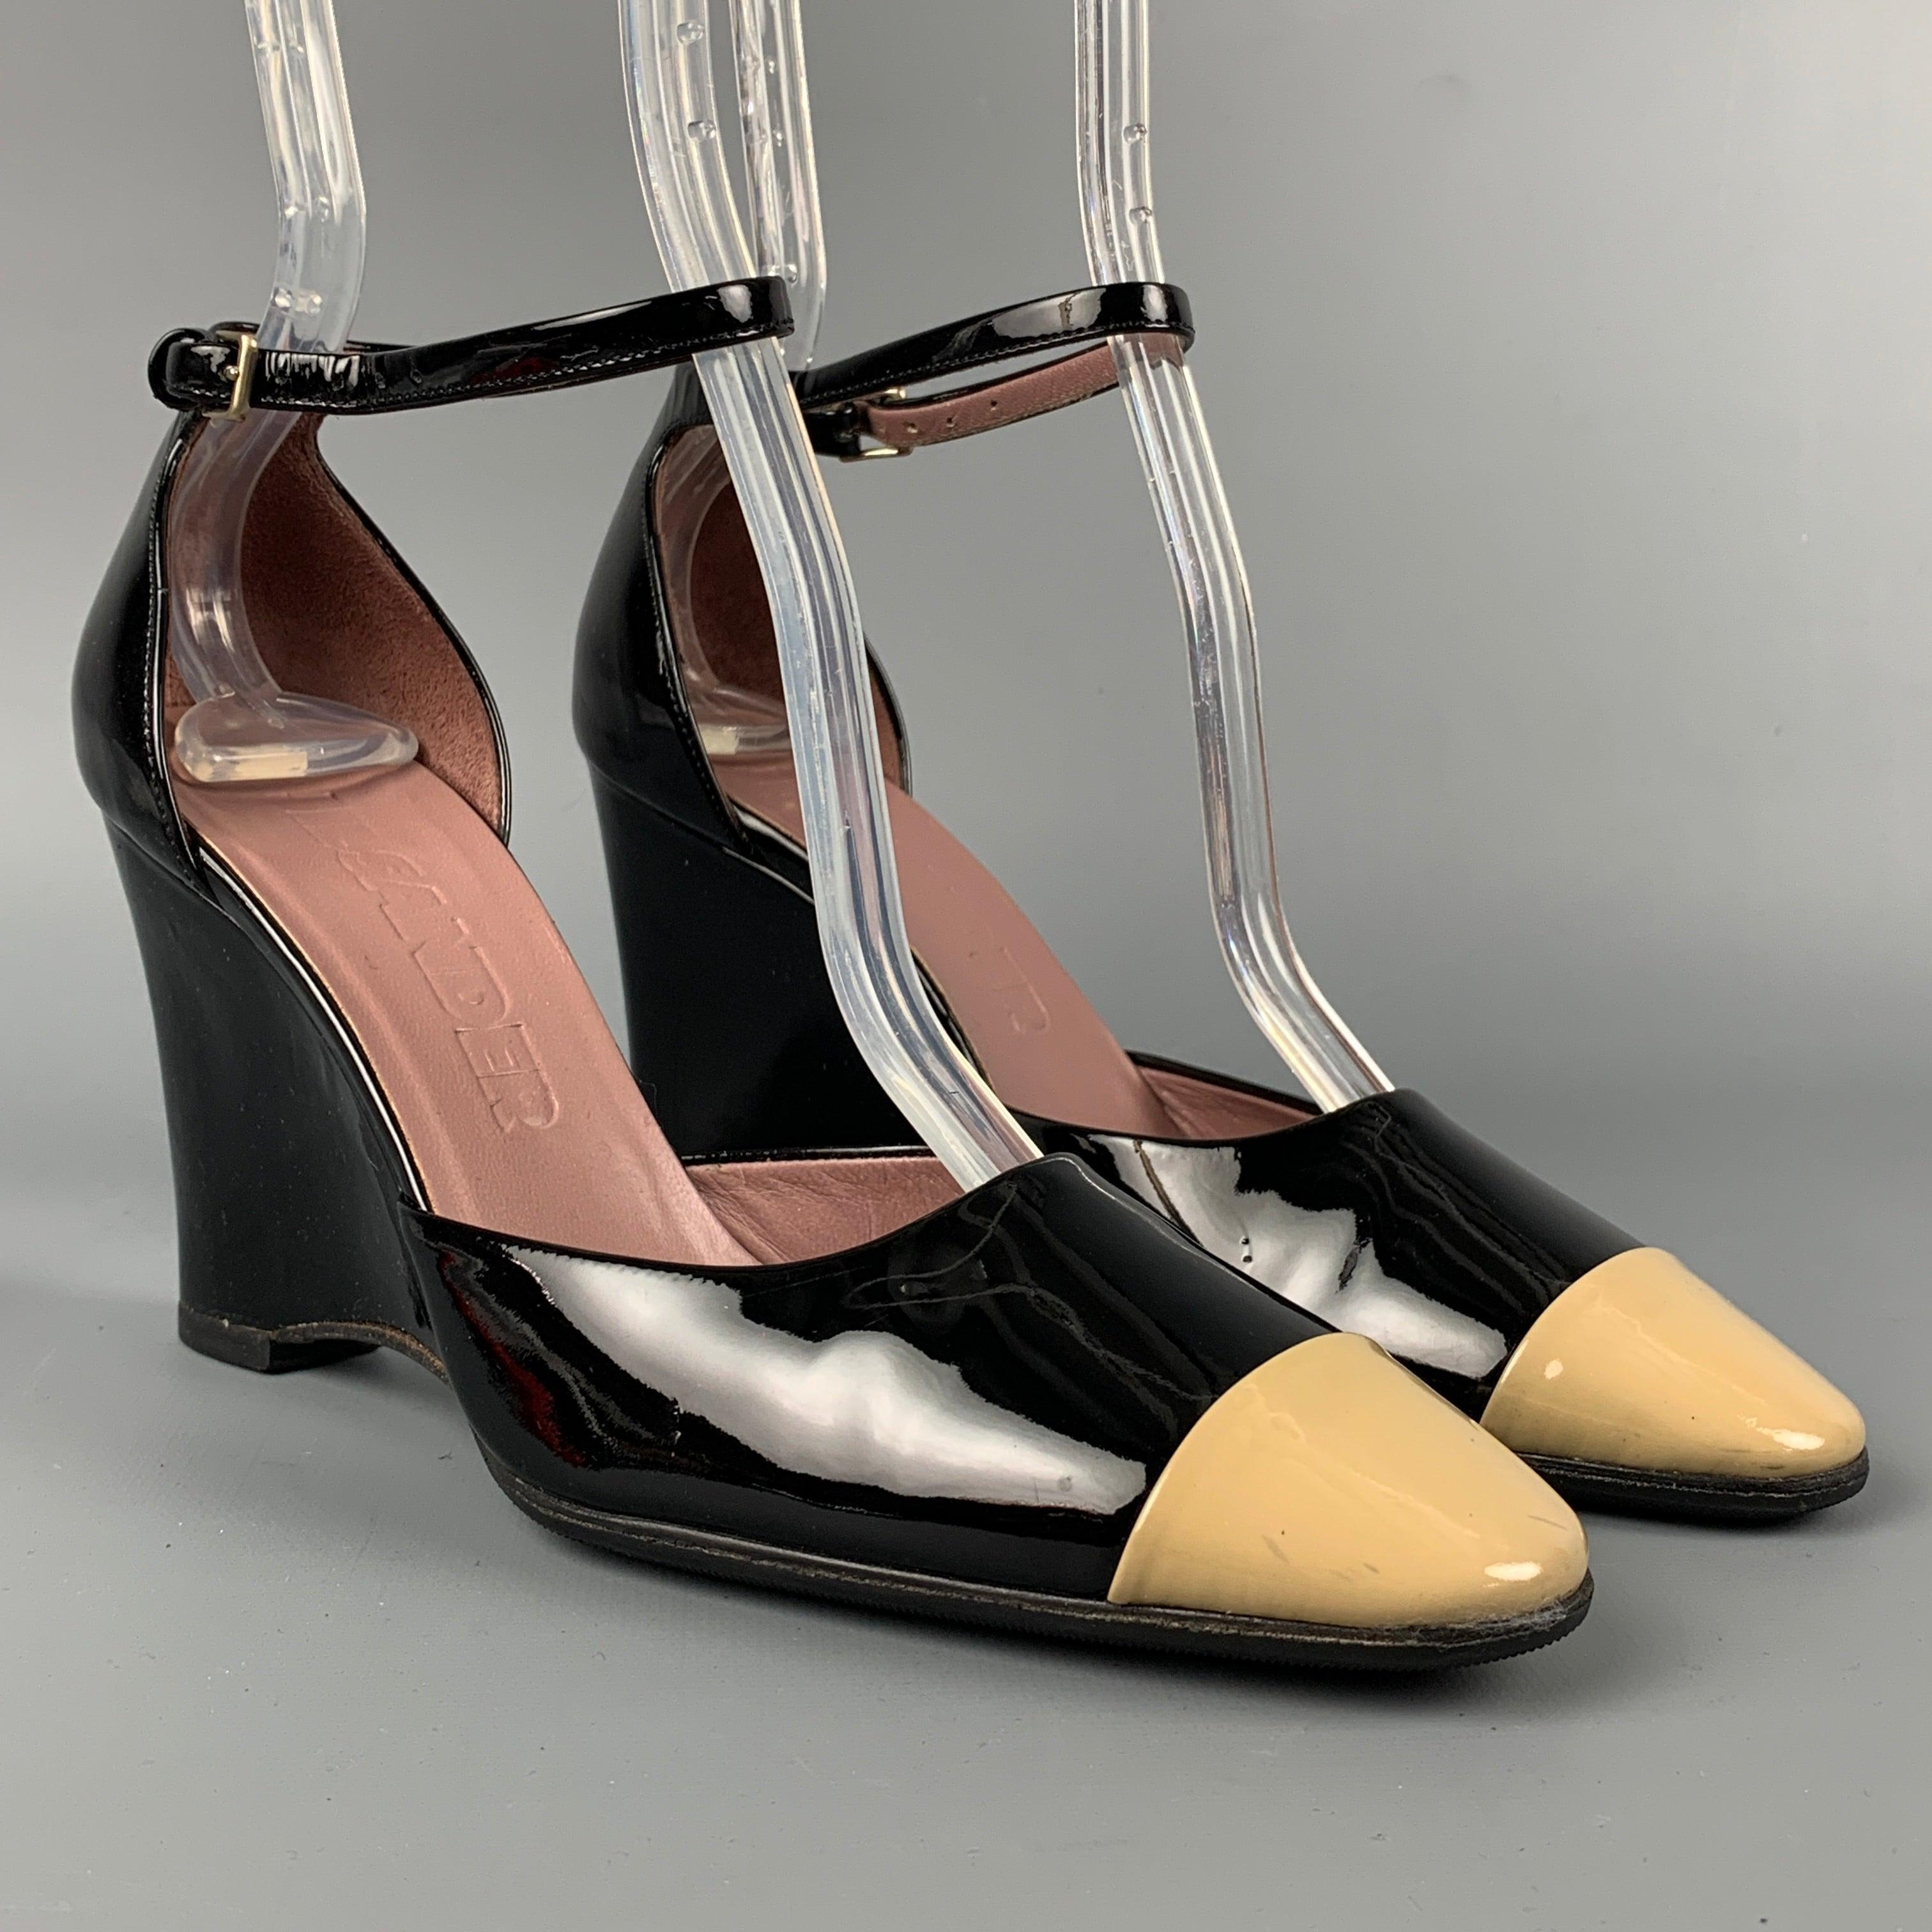 JIL SANDER pumps comes in a black & nude color block patent leather comes in a cap toe, narrow fit, wedge heel, and a ankle strap closure.
Very Good
Pre-Owned Condition. 

Marked:   No size marked.  

Measurements: 
  Heel: 3.5 inches 
  
  
